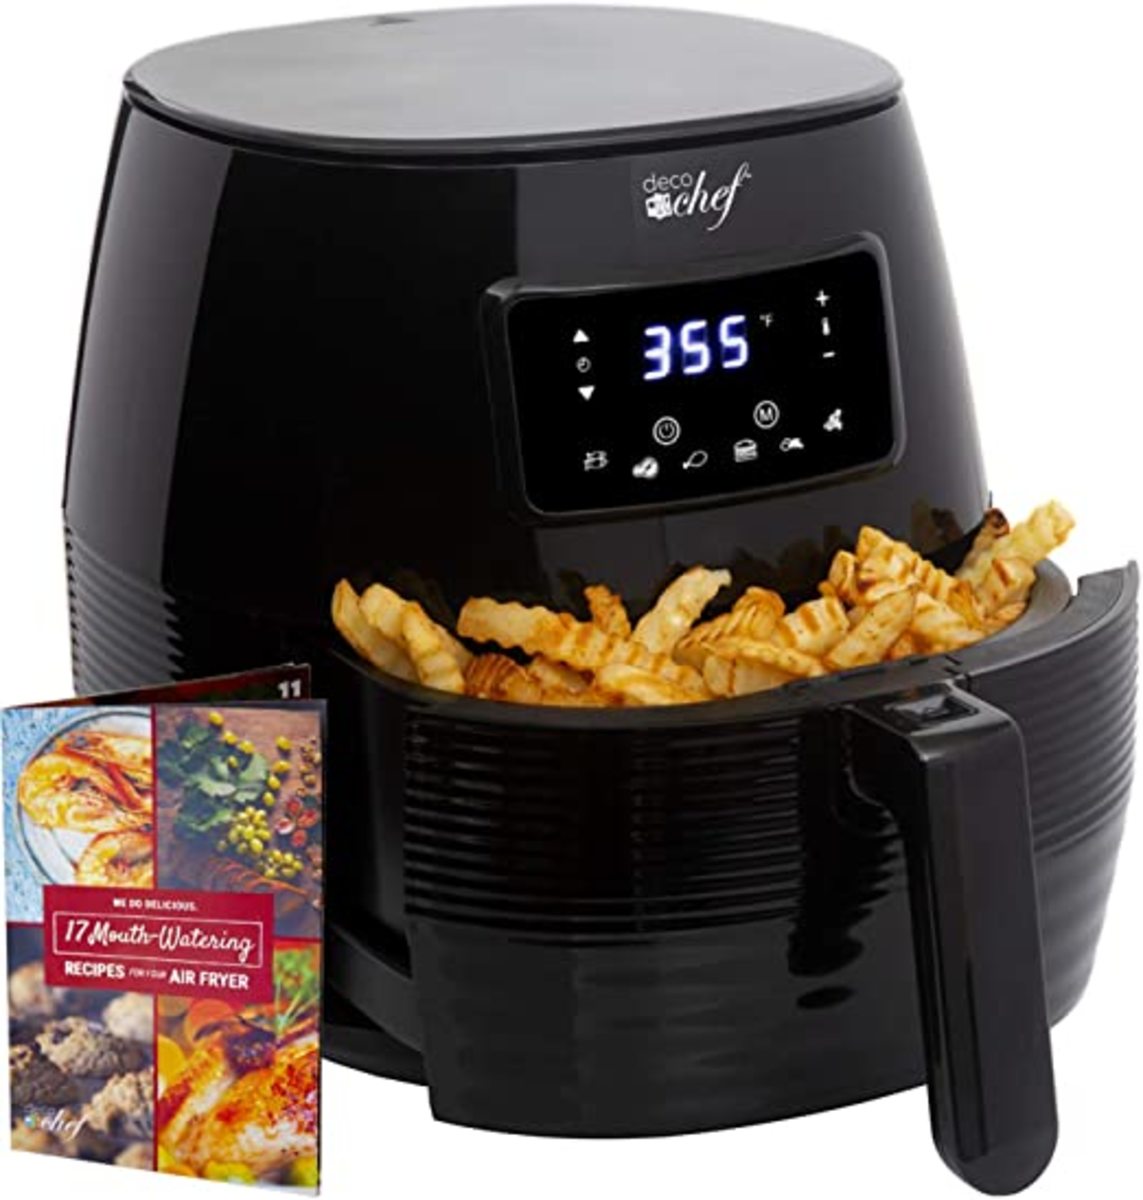 Air Fryer: What to Consider When Buying Your First One